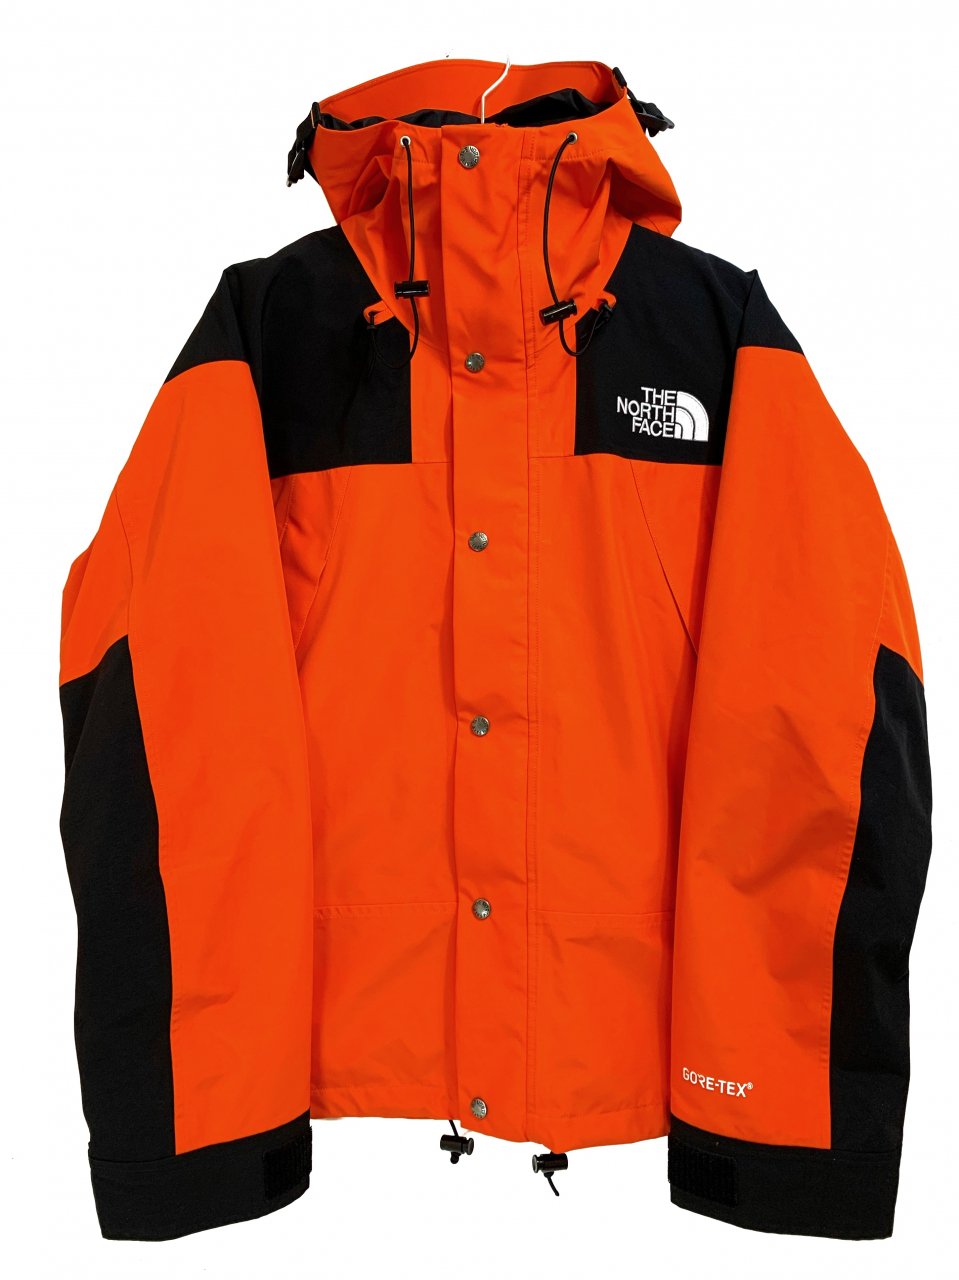 US企画 THE NORTH FACE 1990 Mountain Jacket GTX 